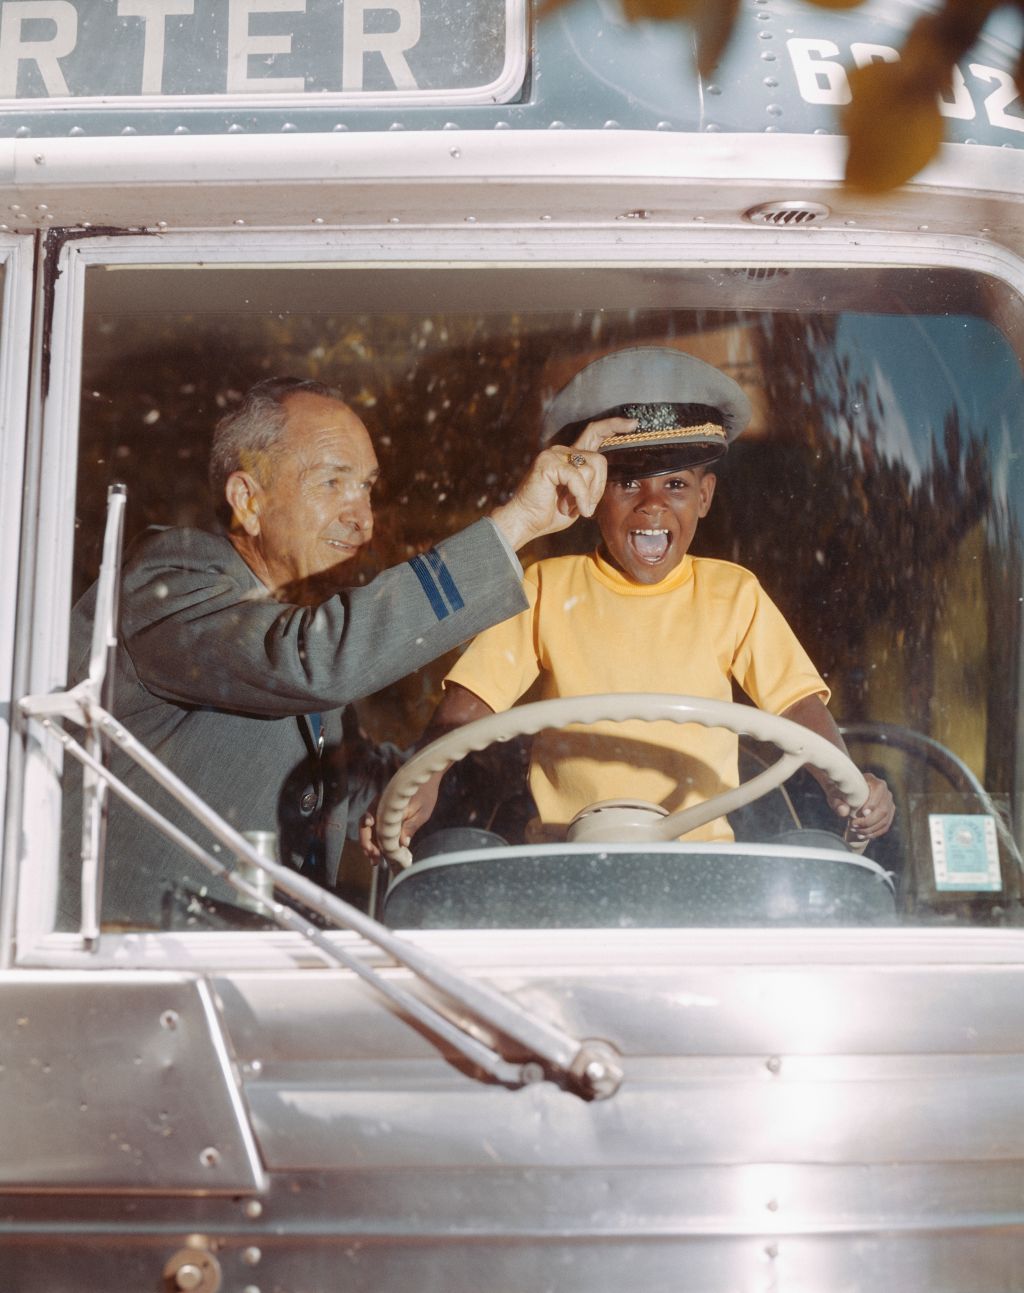 Bus driver giving hat to happy boy holding steering wheel